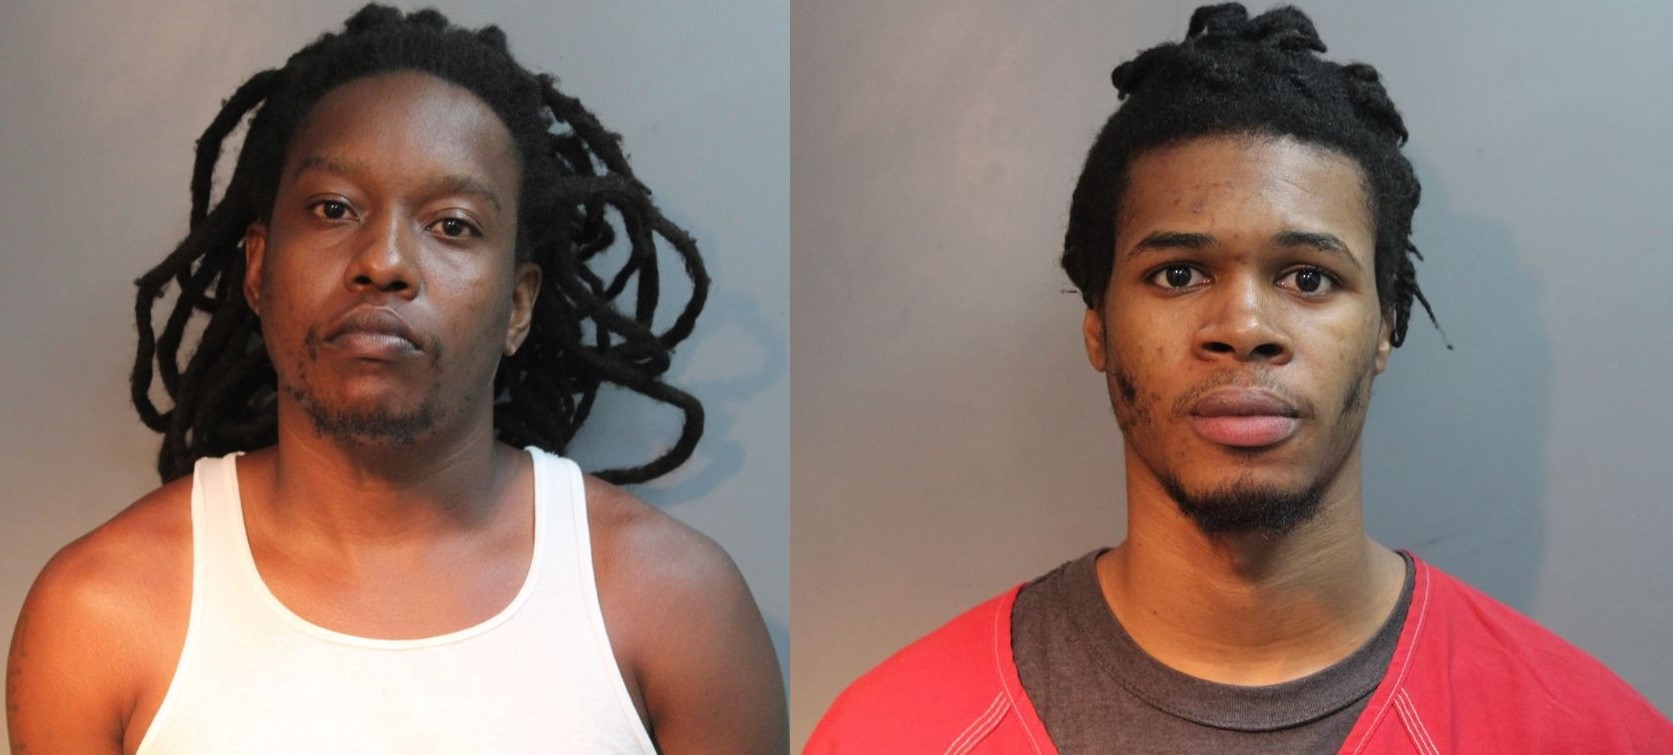 Judge Puts Bail At $1 Million For St. Croix Men Accused In Watergut Shanty Murder From June